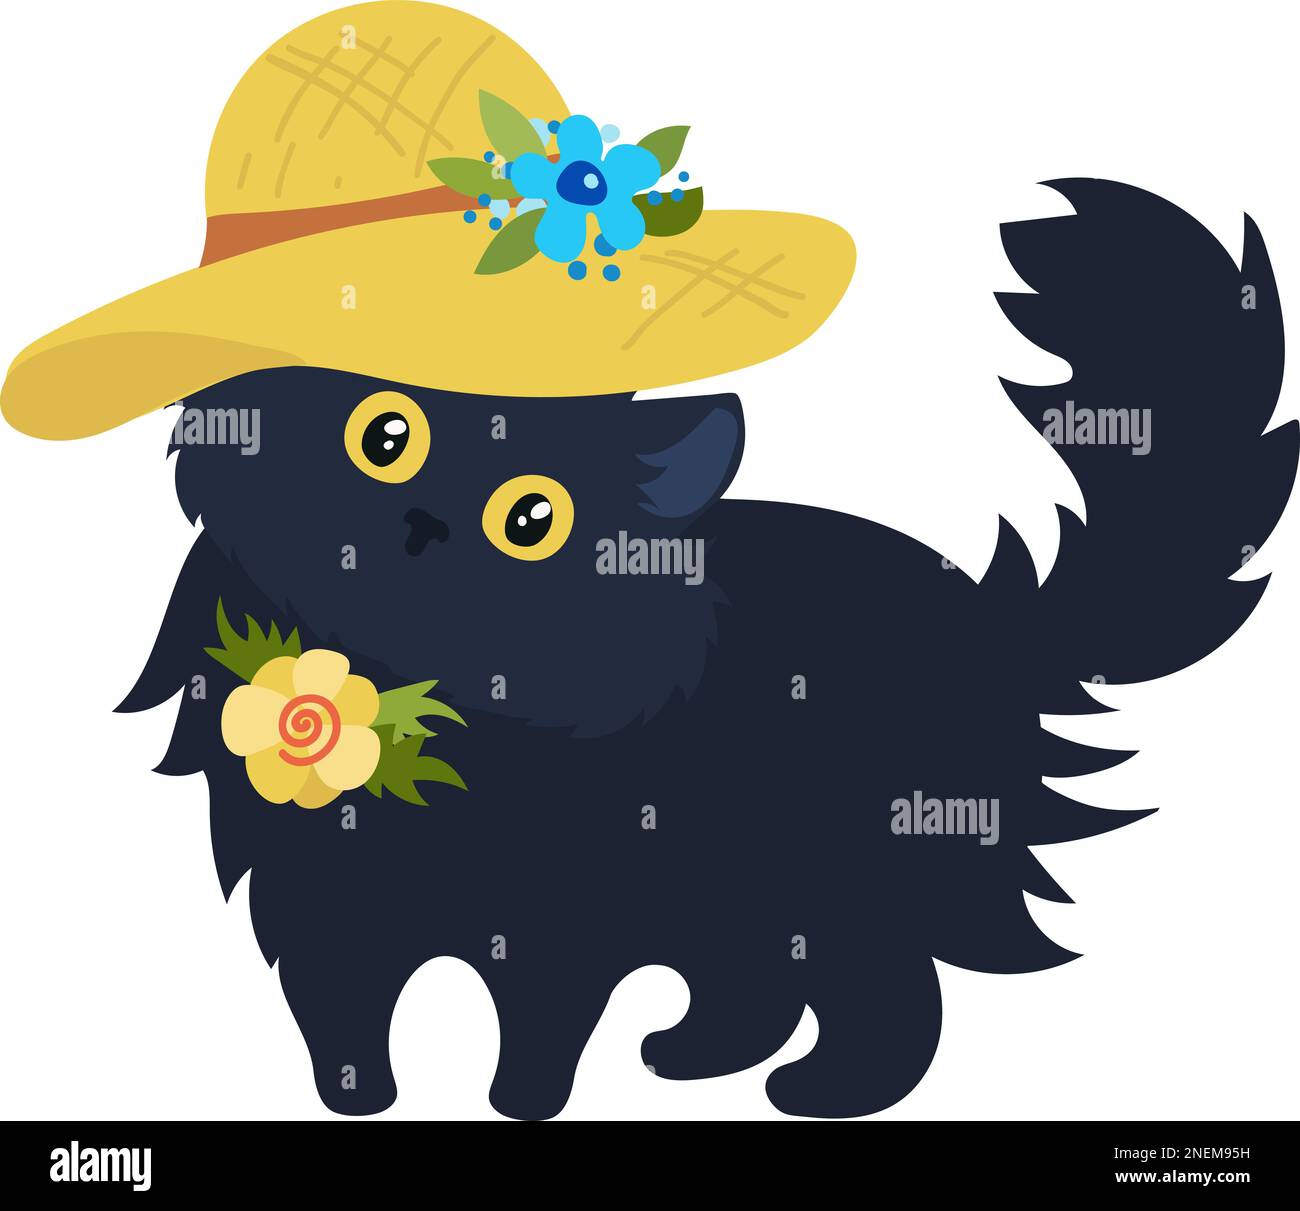 black cat in yellow summer hat with flowers, cartoon style Vector Stock Vector